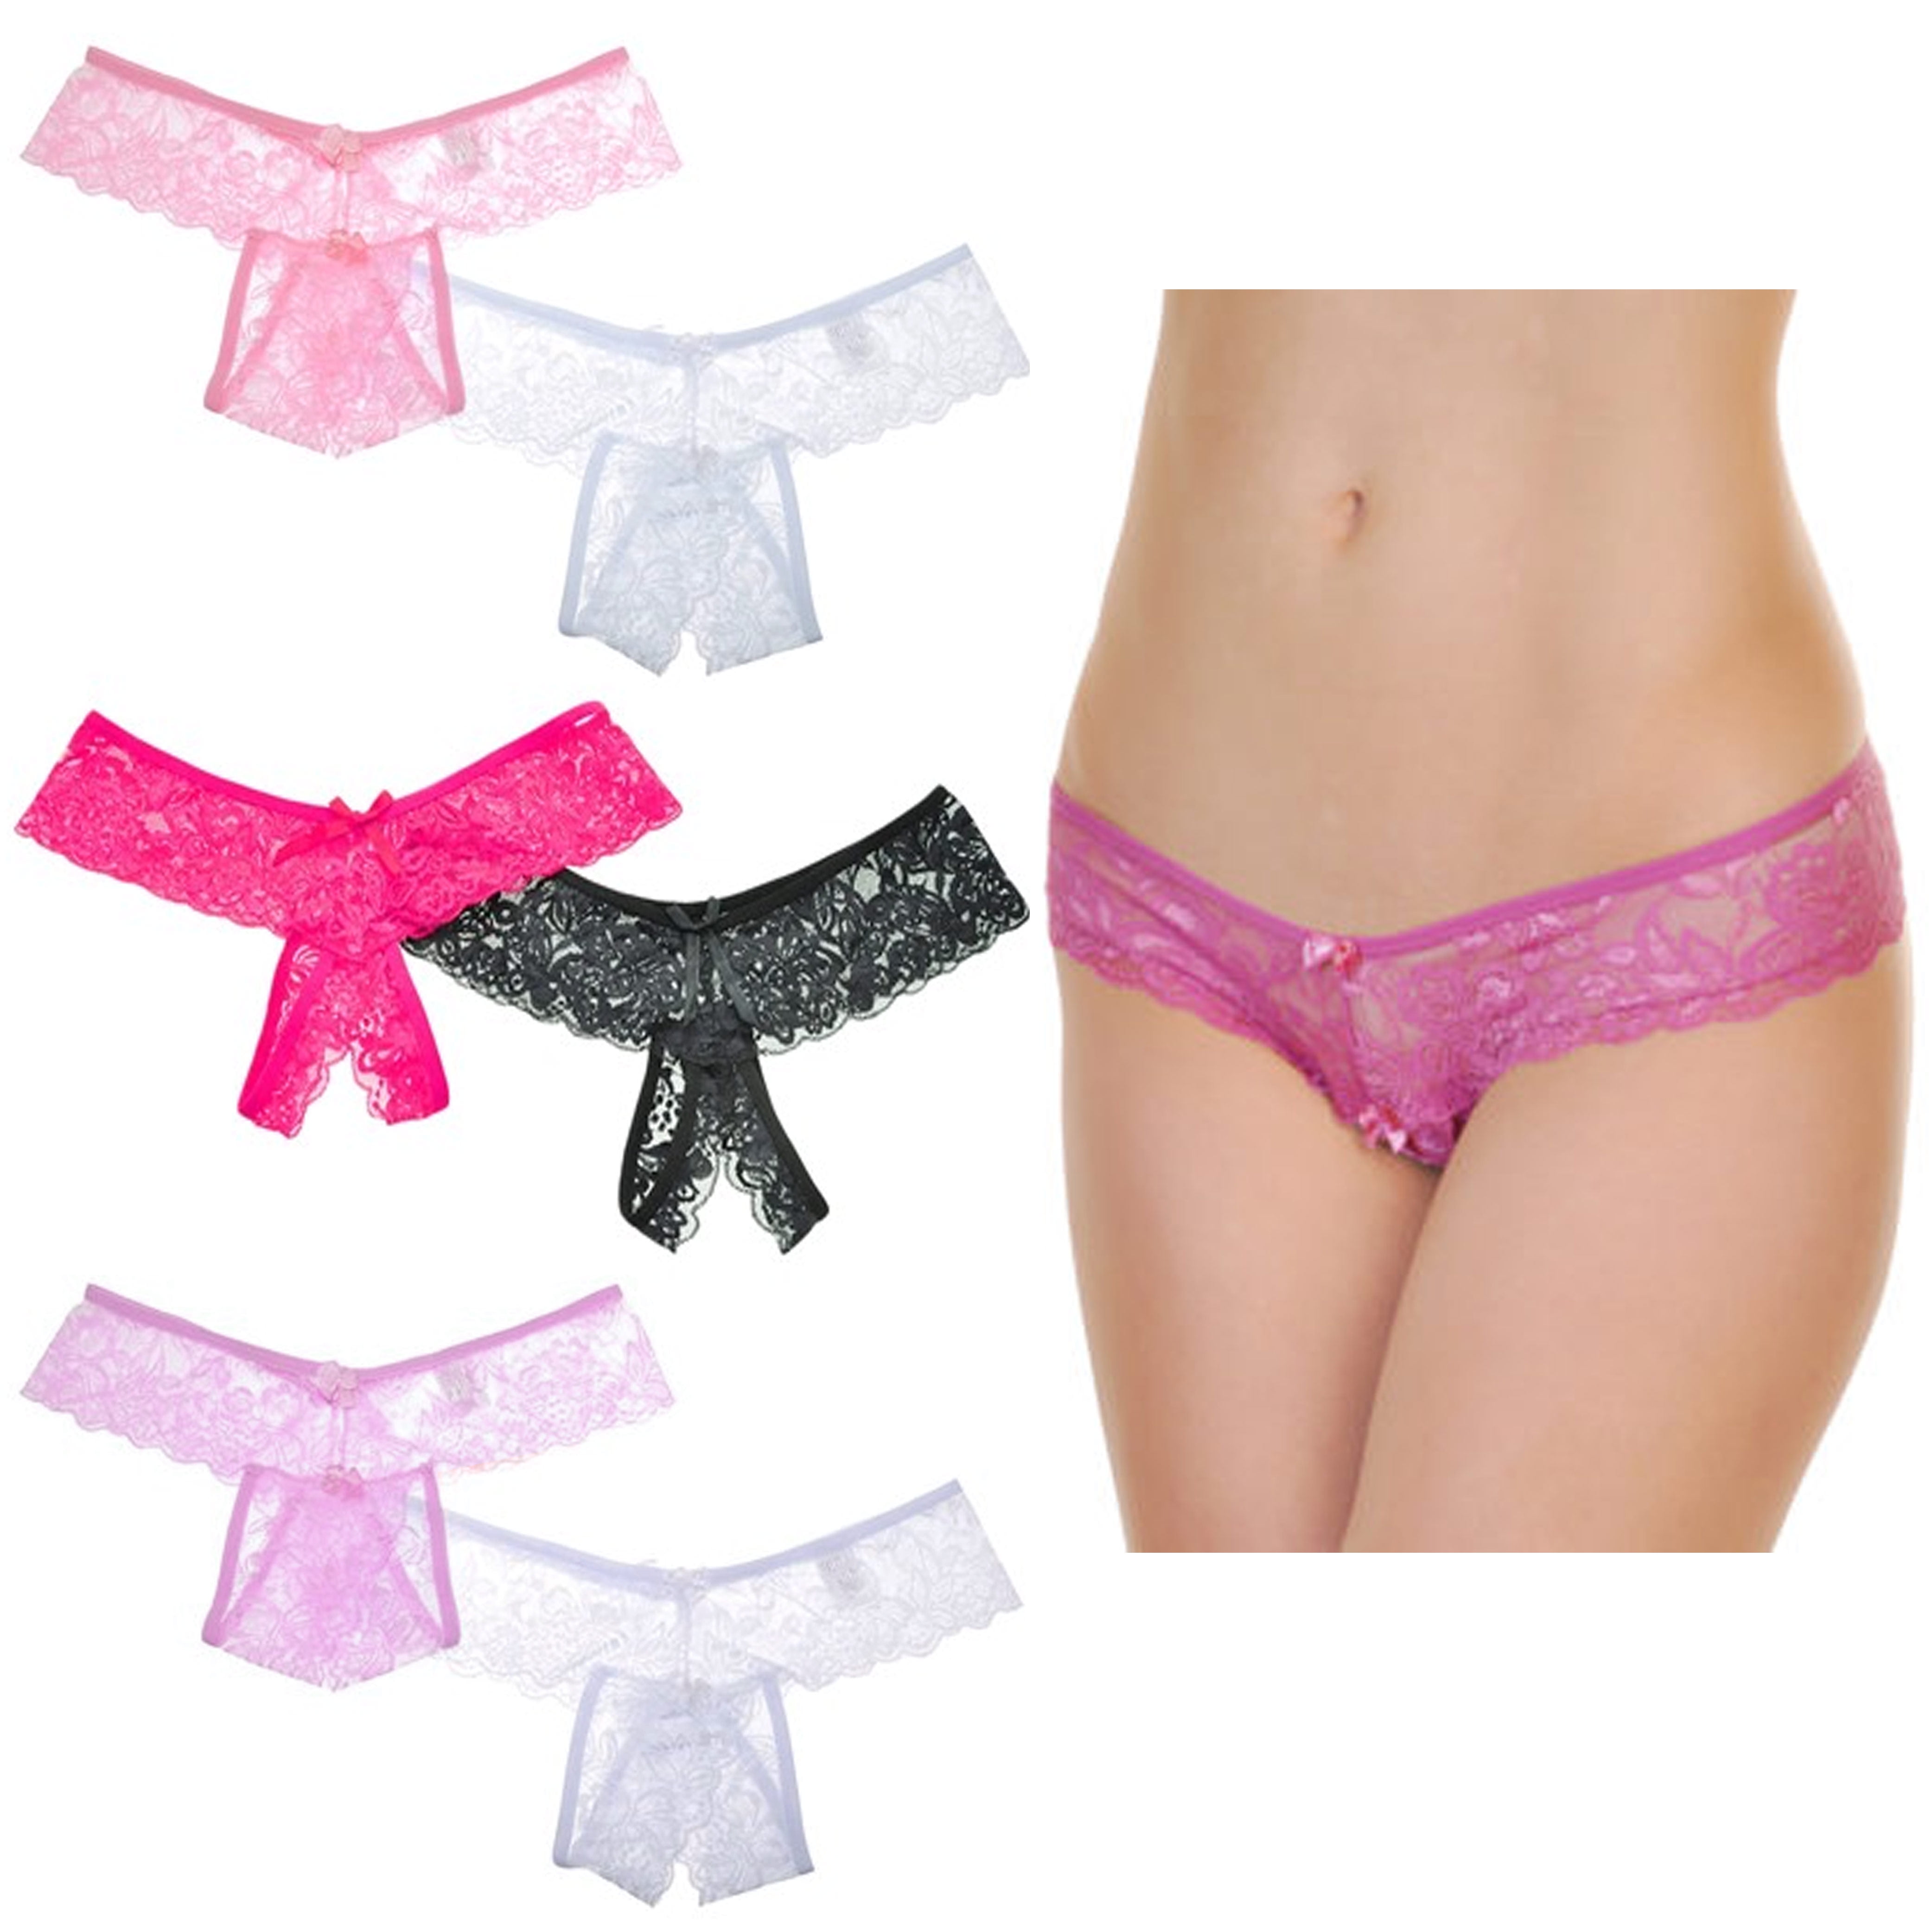 Women Crotchless Thongs Underwear Lace Panties Briefs Lingerie G-string Knickers 